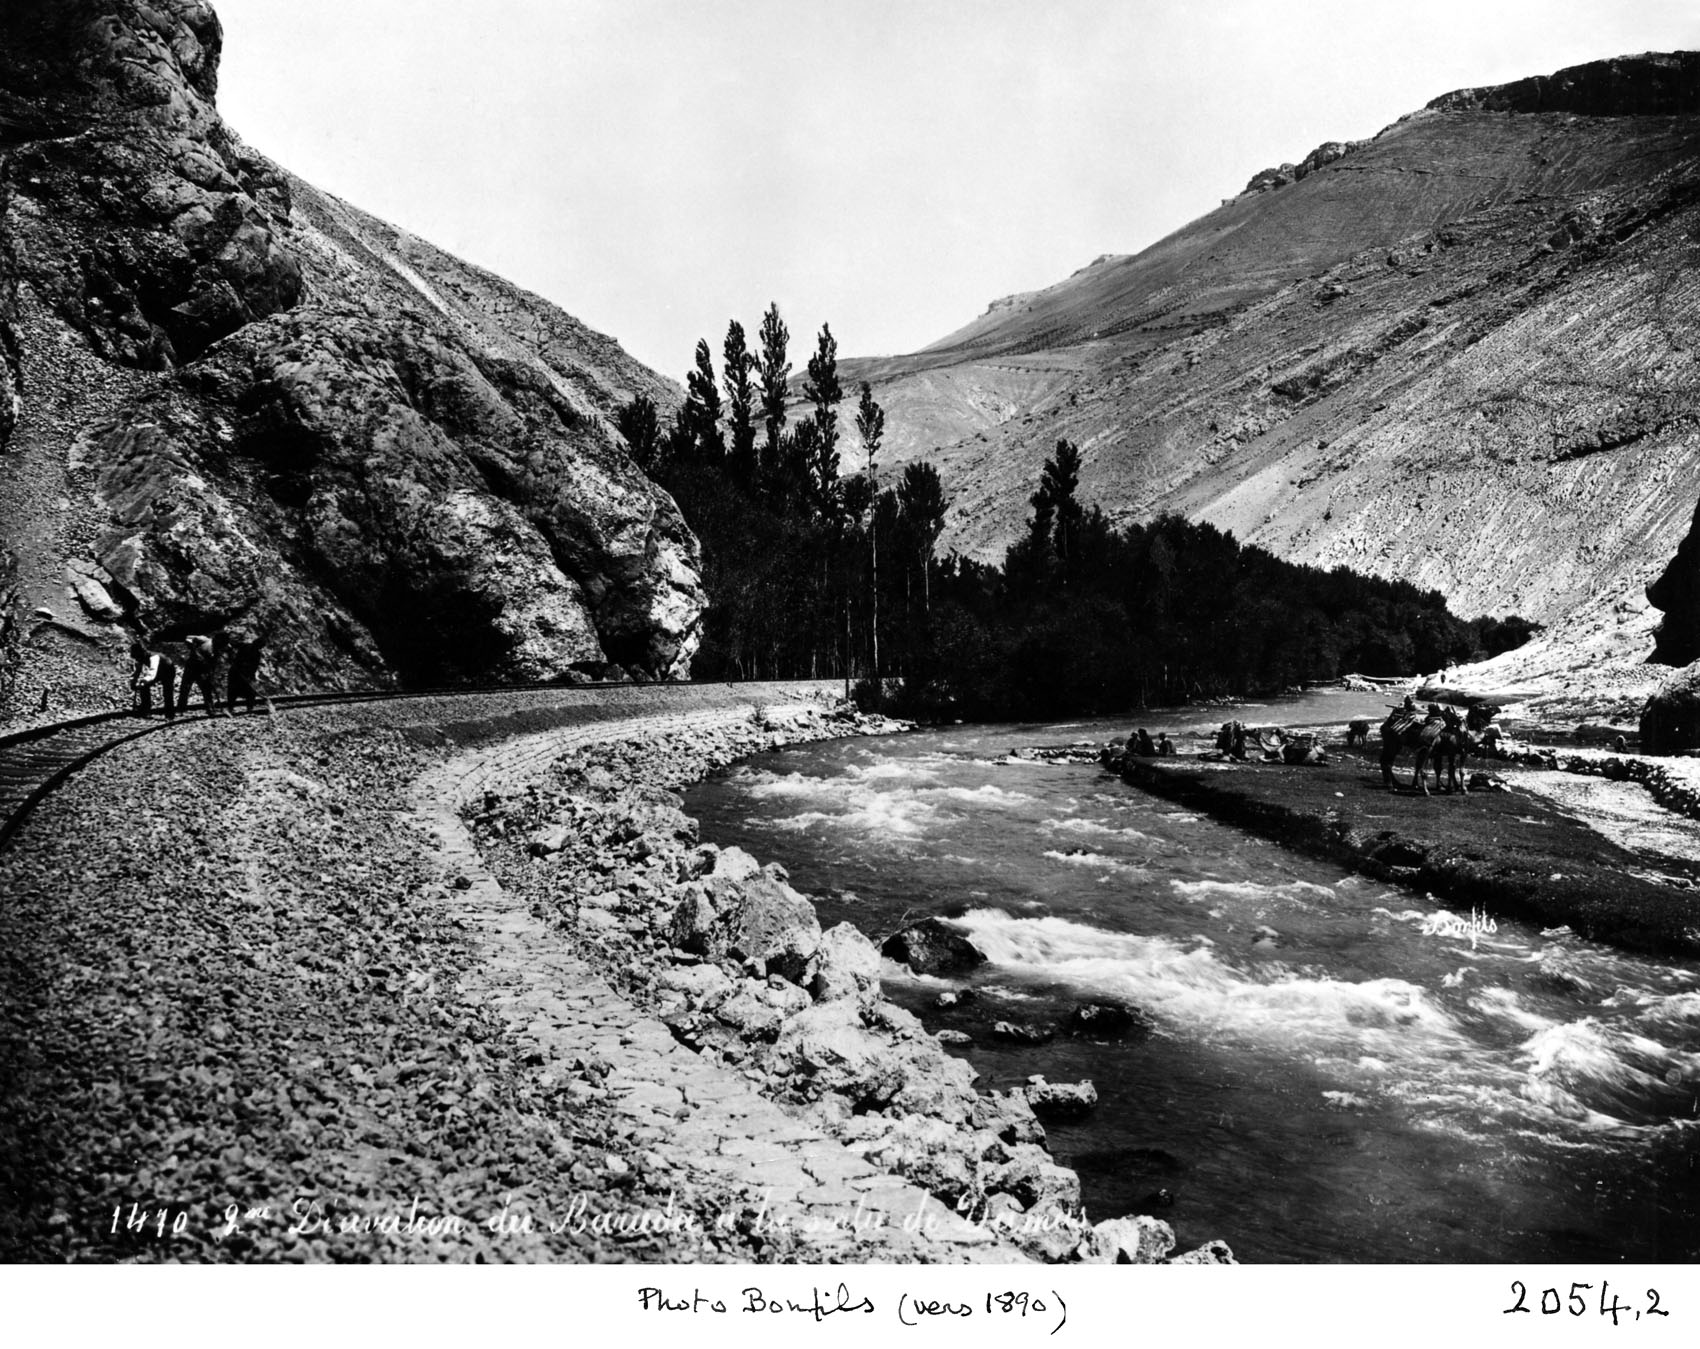 Landscape view of Barada River and rail track downstream from Damascus